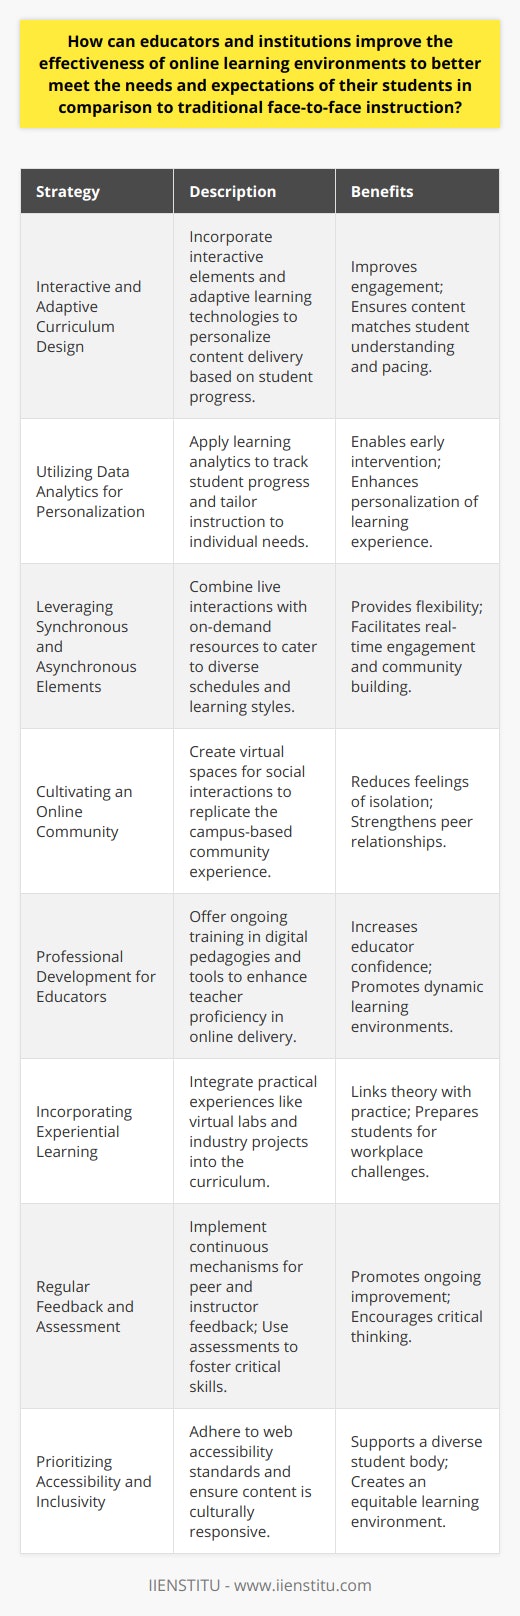 In the evolving landscape of education, the online learning environment is a critical space that requires attention to meet the needs and expectations of students who are accustomed to traditional face-to-face instruction. Below are strategies that educators and institutions can implement to elevate the online learning experience.**Interactive and Adaptive Curriculum Design**The design of the curriculum plays a vital role in engaging students. This means incorporating interactive elements that can captivate learners and provide immediate feedback. Adaptive learning technologies can adjust the content based on the learner's progress, ensuring that students receive content that is suitable for their level of understanding and pace.**Utilizing Data Analytics for Personalization**Educational institutions can employ learning analytics to gain insights into student interactions with online content. By closely monitoring progress and engagement levels, educators can personalize instruction, identify students who might be struggling, and provide specific interventions to support their learning journey.**Leveraging Synchronous and Asynchronous Elements**A balanced mix of synchronous (live) and asynchronous (on-demand) content delivery allows students to benefit from direct interaction with instructors and peers while also giving them the flexibility to learn at their own pace. Key is finding the right blend that accommodates various time zones and personal schedules without compromising the sense of community and the immediacy that comes with real-time discussions.**Cultivating an Online Community**Building a sense of community is crucial for online learners who may feel isolated from their peers. This can be achieved through virtual clubs, study groups, and social events that mimic the extracurricular aspects of campus life. Success in this area requires active facilitation to encourage participation and foster relationships among students.**Professional Development for Educators**Educators themselves must be skilled in delivering content online. Regular training and professional development opportunities should be offered to empower teachers with the latest digital pedagogies and tools. When educators are confident in using technology, they can create more dynamic and effective online learning experiences.**Incorporating Experiential Learning**The application of knowledge can be facilitated by integrating real-world projects and simulations into the curriculum. Providing practical experience through virtual labs, case studies, and industry partnerships can make learning more relevant and equip students with skills that are directly transferable to the workplace.**Regular Feedback and Assessment**Continuous feedback is integral to student success. Online learning environments should have mechanisms for both peers and educators to offer constructive feedback. Likewise, assessments should not only evaluate student knowledge but also promote critical thinking and creativity.**Prioritizing Accessibility and Inclusivity**Ensuring that online learning materials are accessible to all students, including those with disabilities, is a fundamental requirement. This includes following web accessibility standards and providing necessary accommodations. Likewise, content should be culturally responsive and inclusive, reflecting a diversity of perspectives.By focusing on these areas—adaptive curriculum design, personalized learning through data analytics, leveraging synchronous and asynchronous delivery, cultivating online communities, investing in educator professional development, incorporating experiential learning, regular feedback and assessment, and prioritizing accessibility and inclusivity—educators and institutions can enhance the online learning environment to better align with the expectations of students accustomed to in-person instruction. Adopting these strategies can lead to a more engaging, effective, and equitable online educational system that serves the needs of a diverse student body.